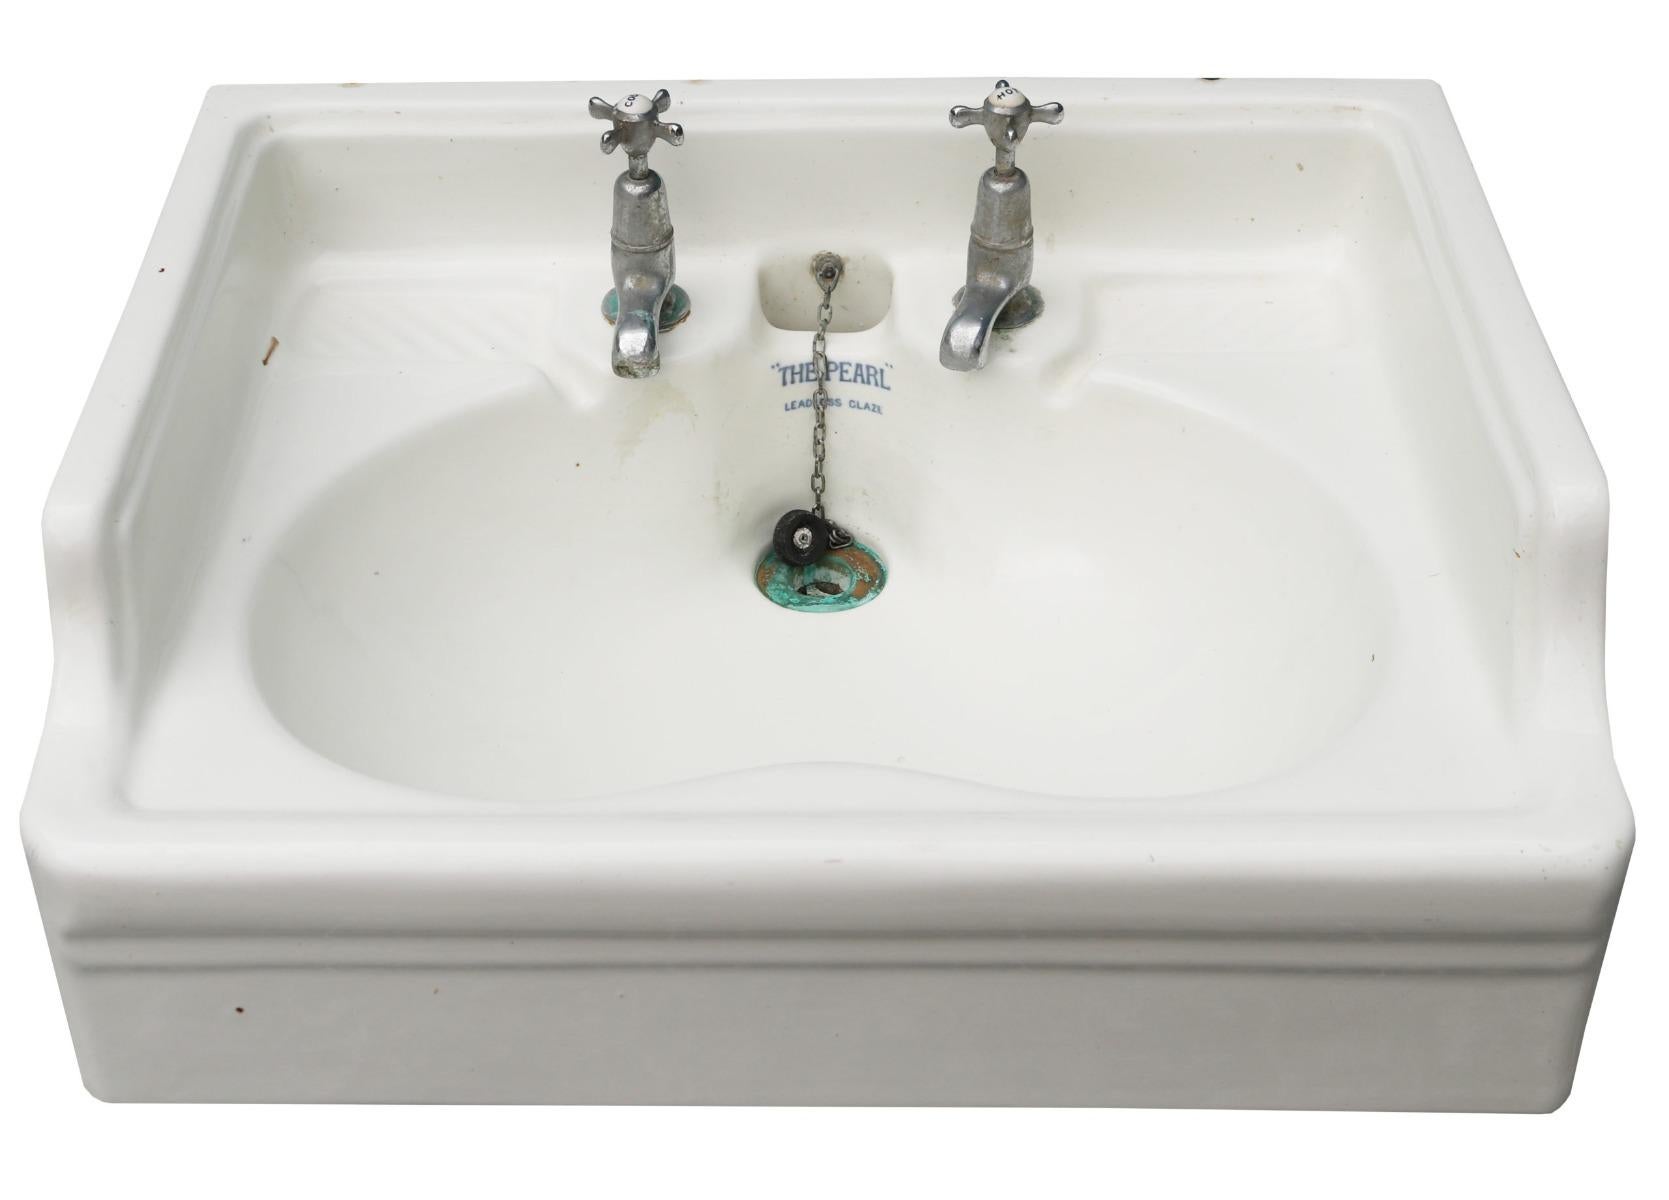 An antique bathroom sink with chrome plated taps, chain, waste and plug. We have three near identical basins available.